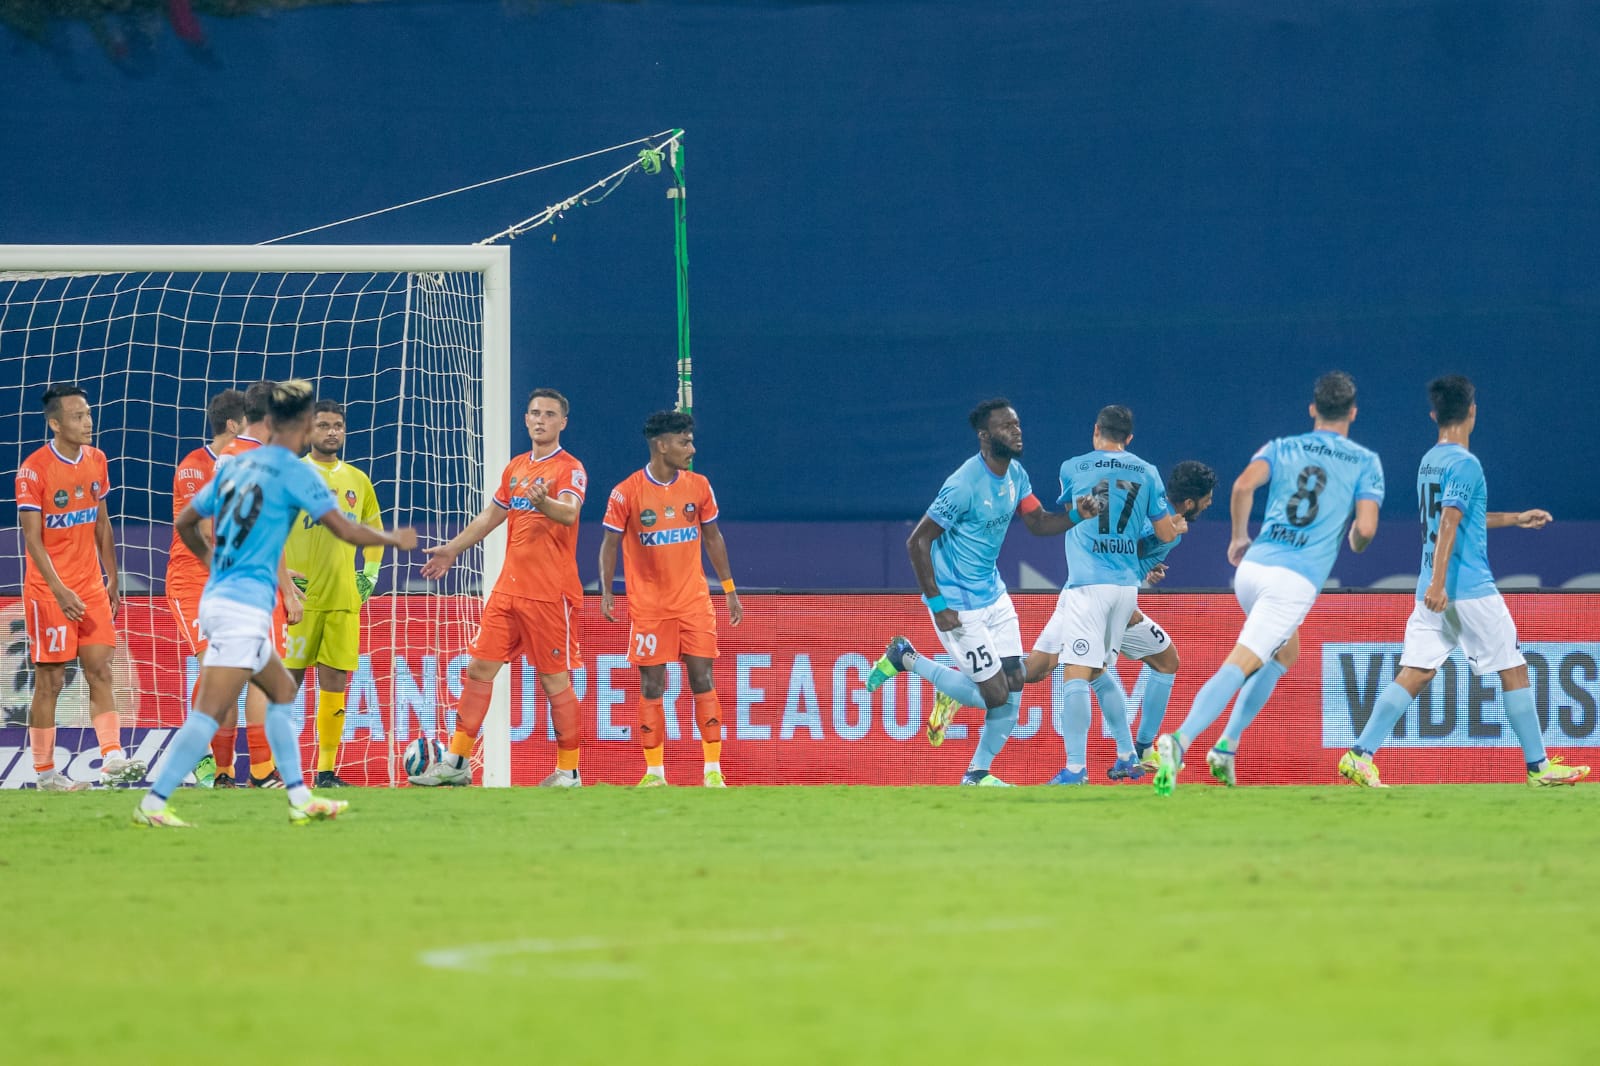 MCFC 2-0 FCG: Goals from Mehtab and Mauricio helps Mumbai City do the double over FC Goa, keeps them in contention for the playoffs